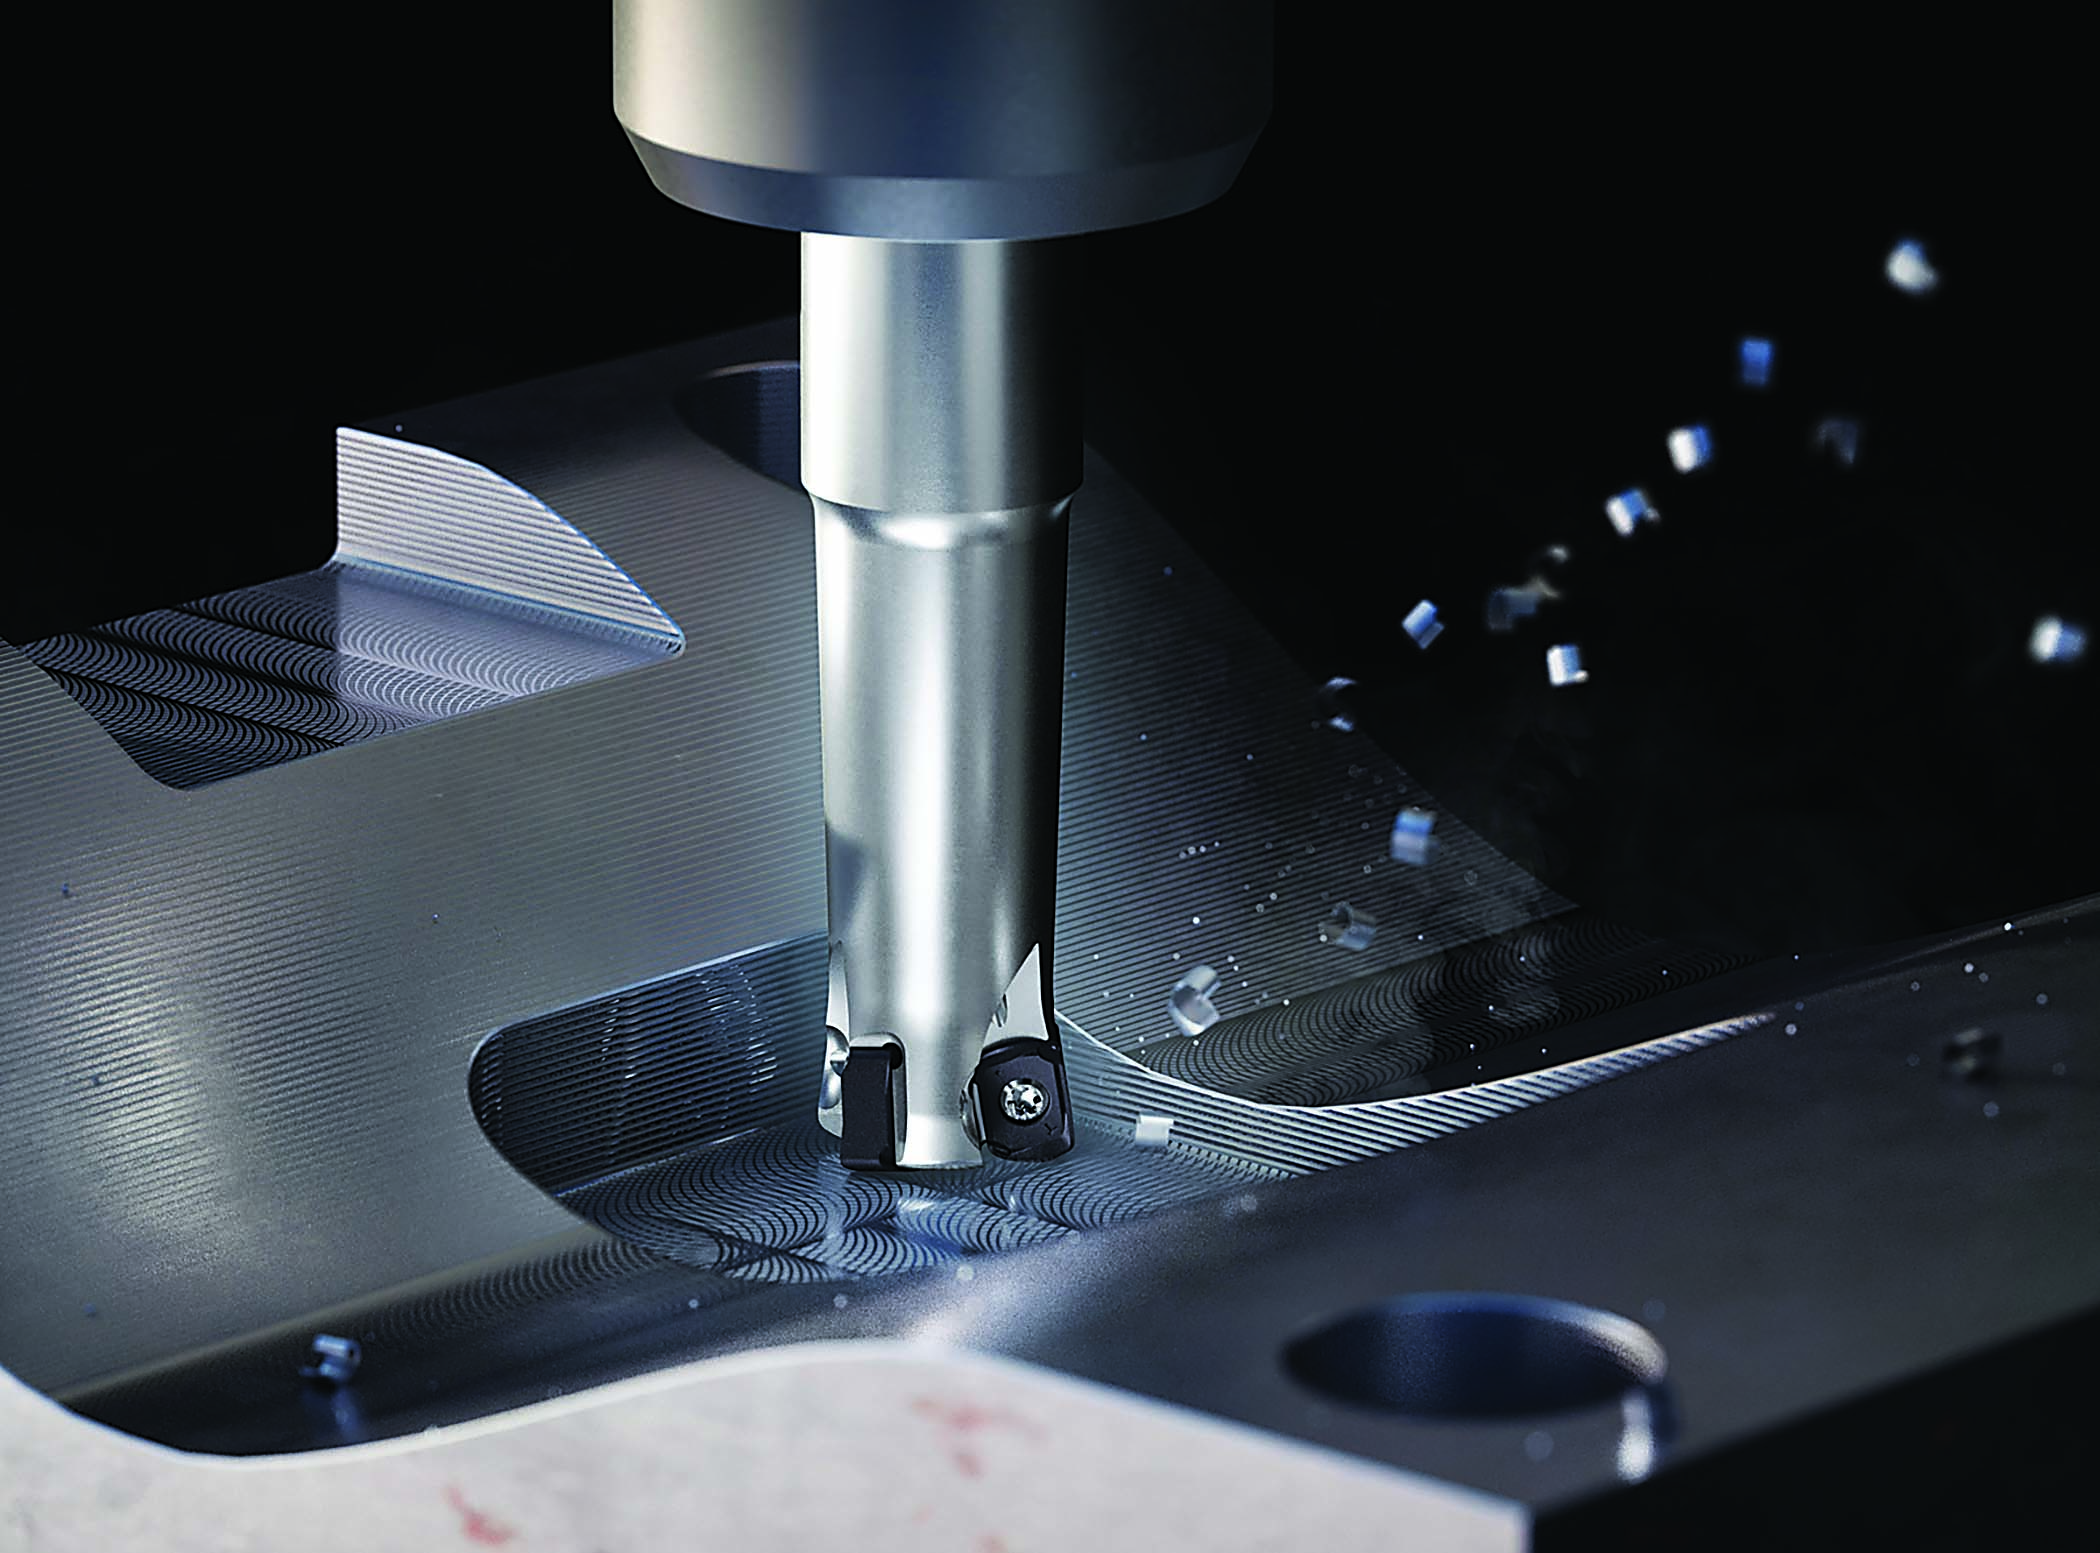 ENMX09 double-sided inserts are suitable for high-feed milling.